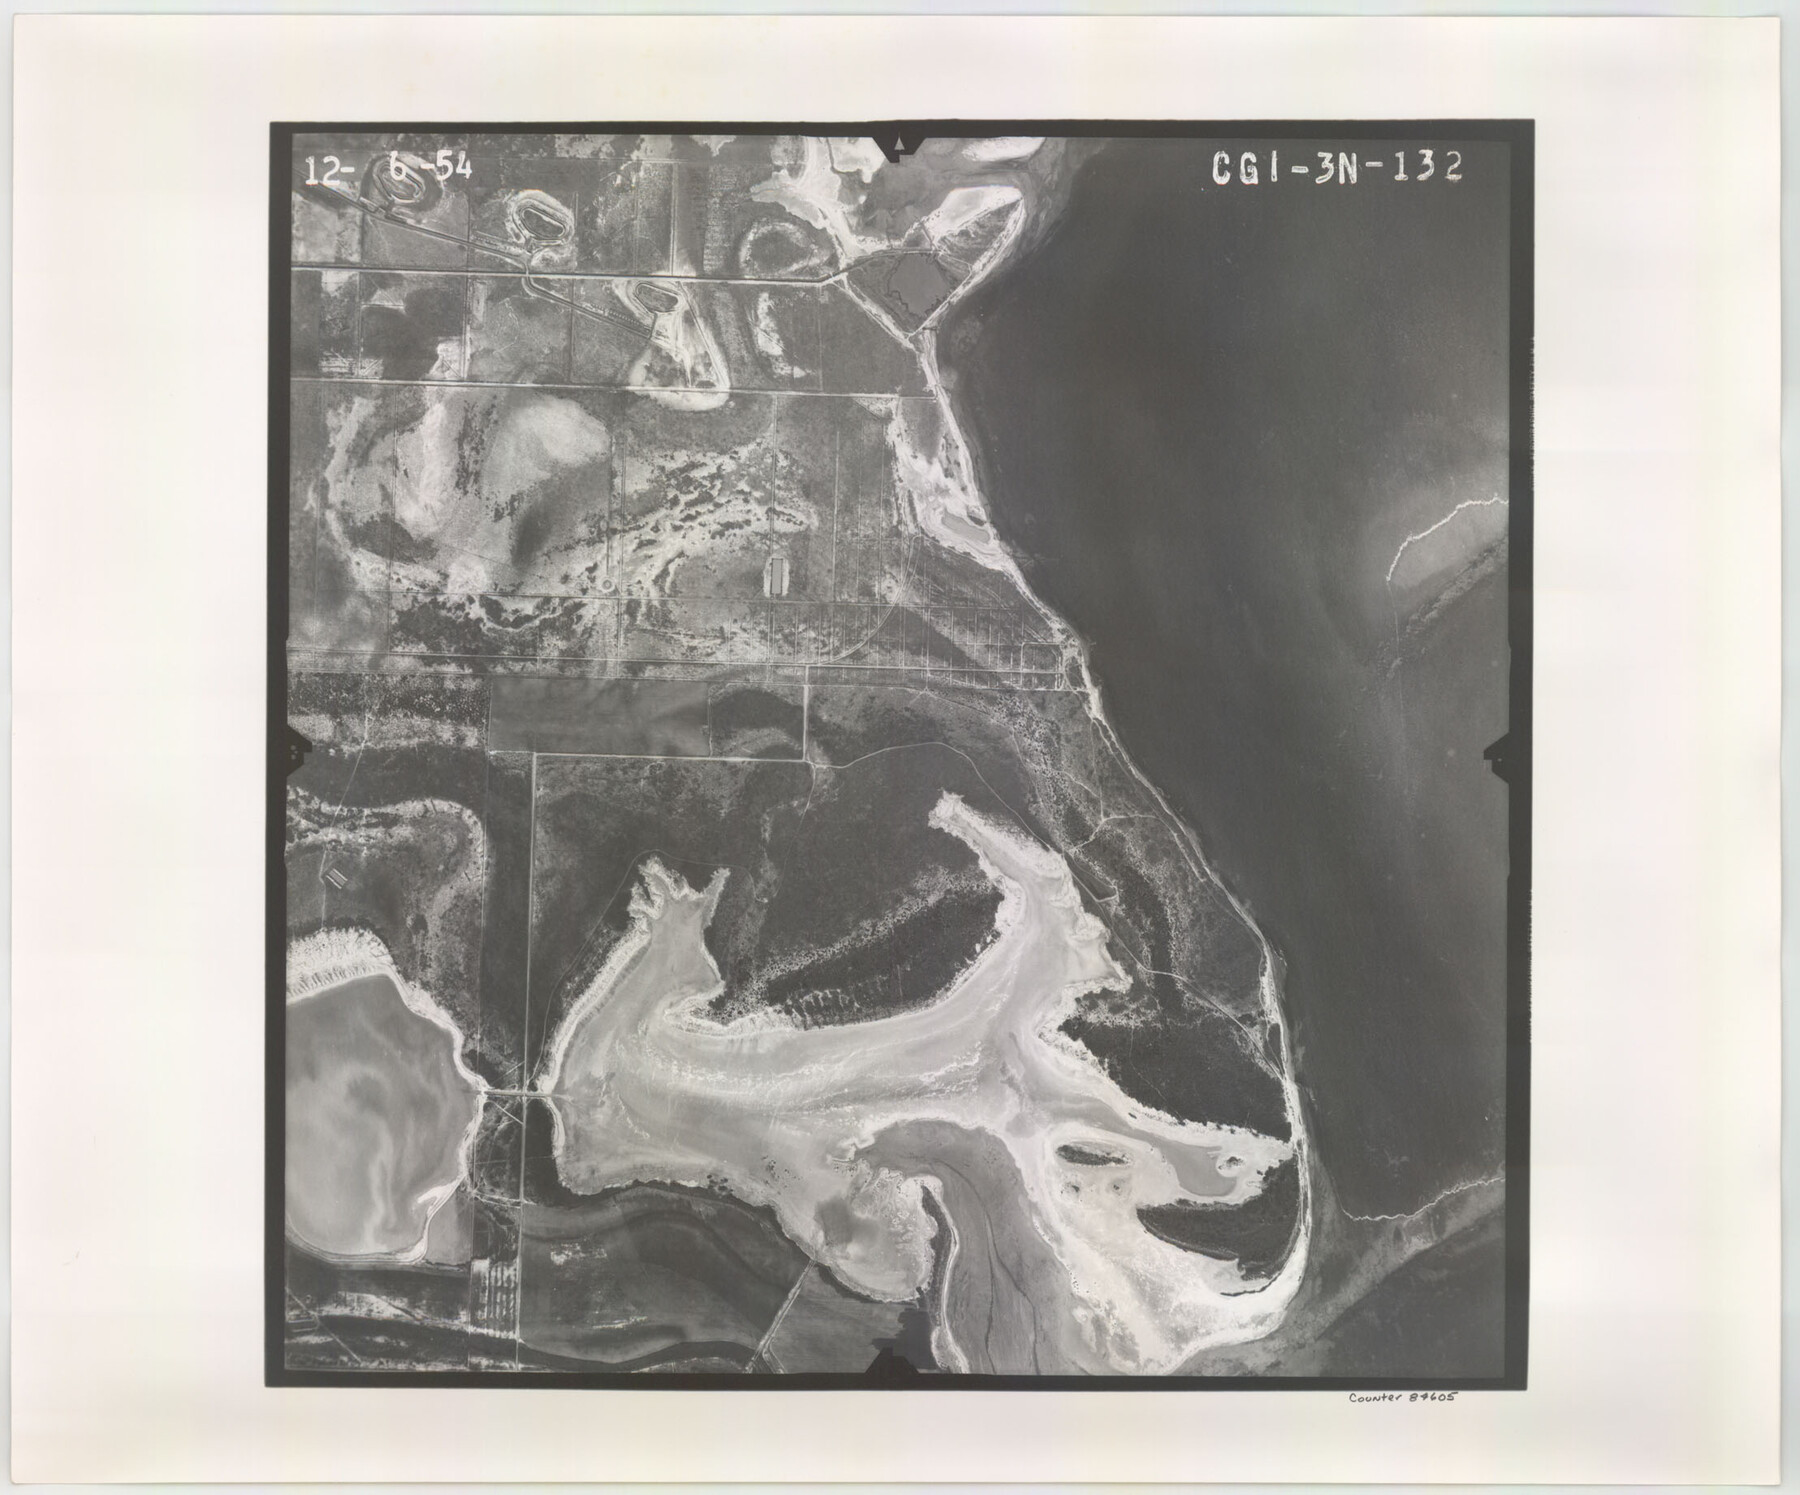 84605, Flight Mission No. CGI-3N, Frame 132, Cameron County, General Map Collection